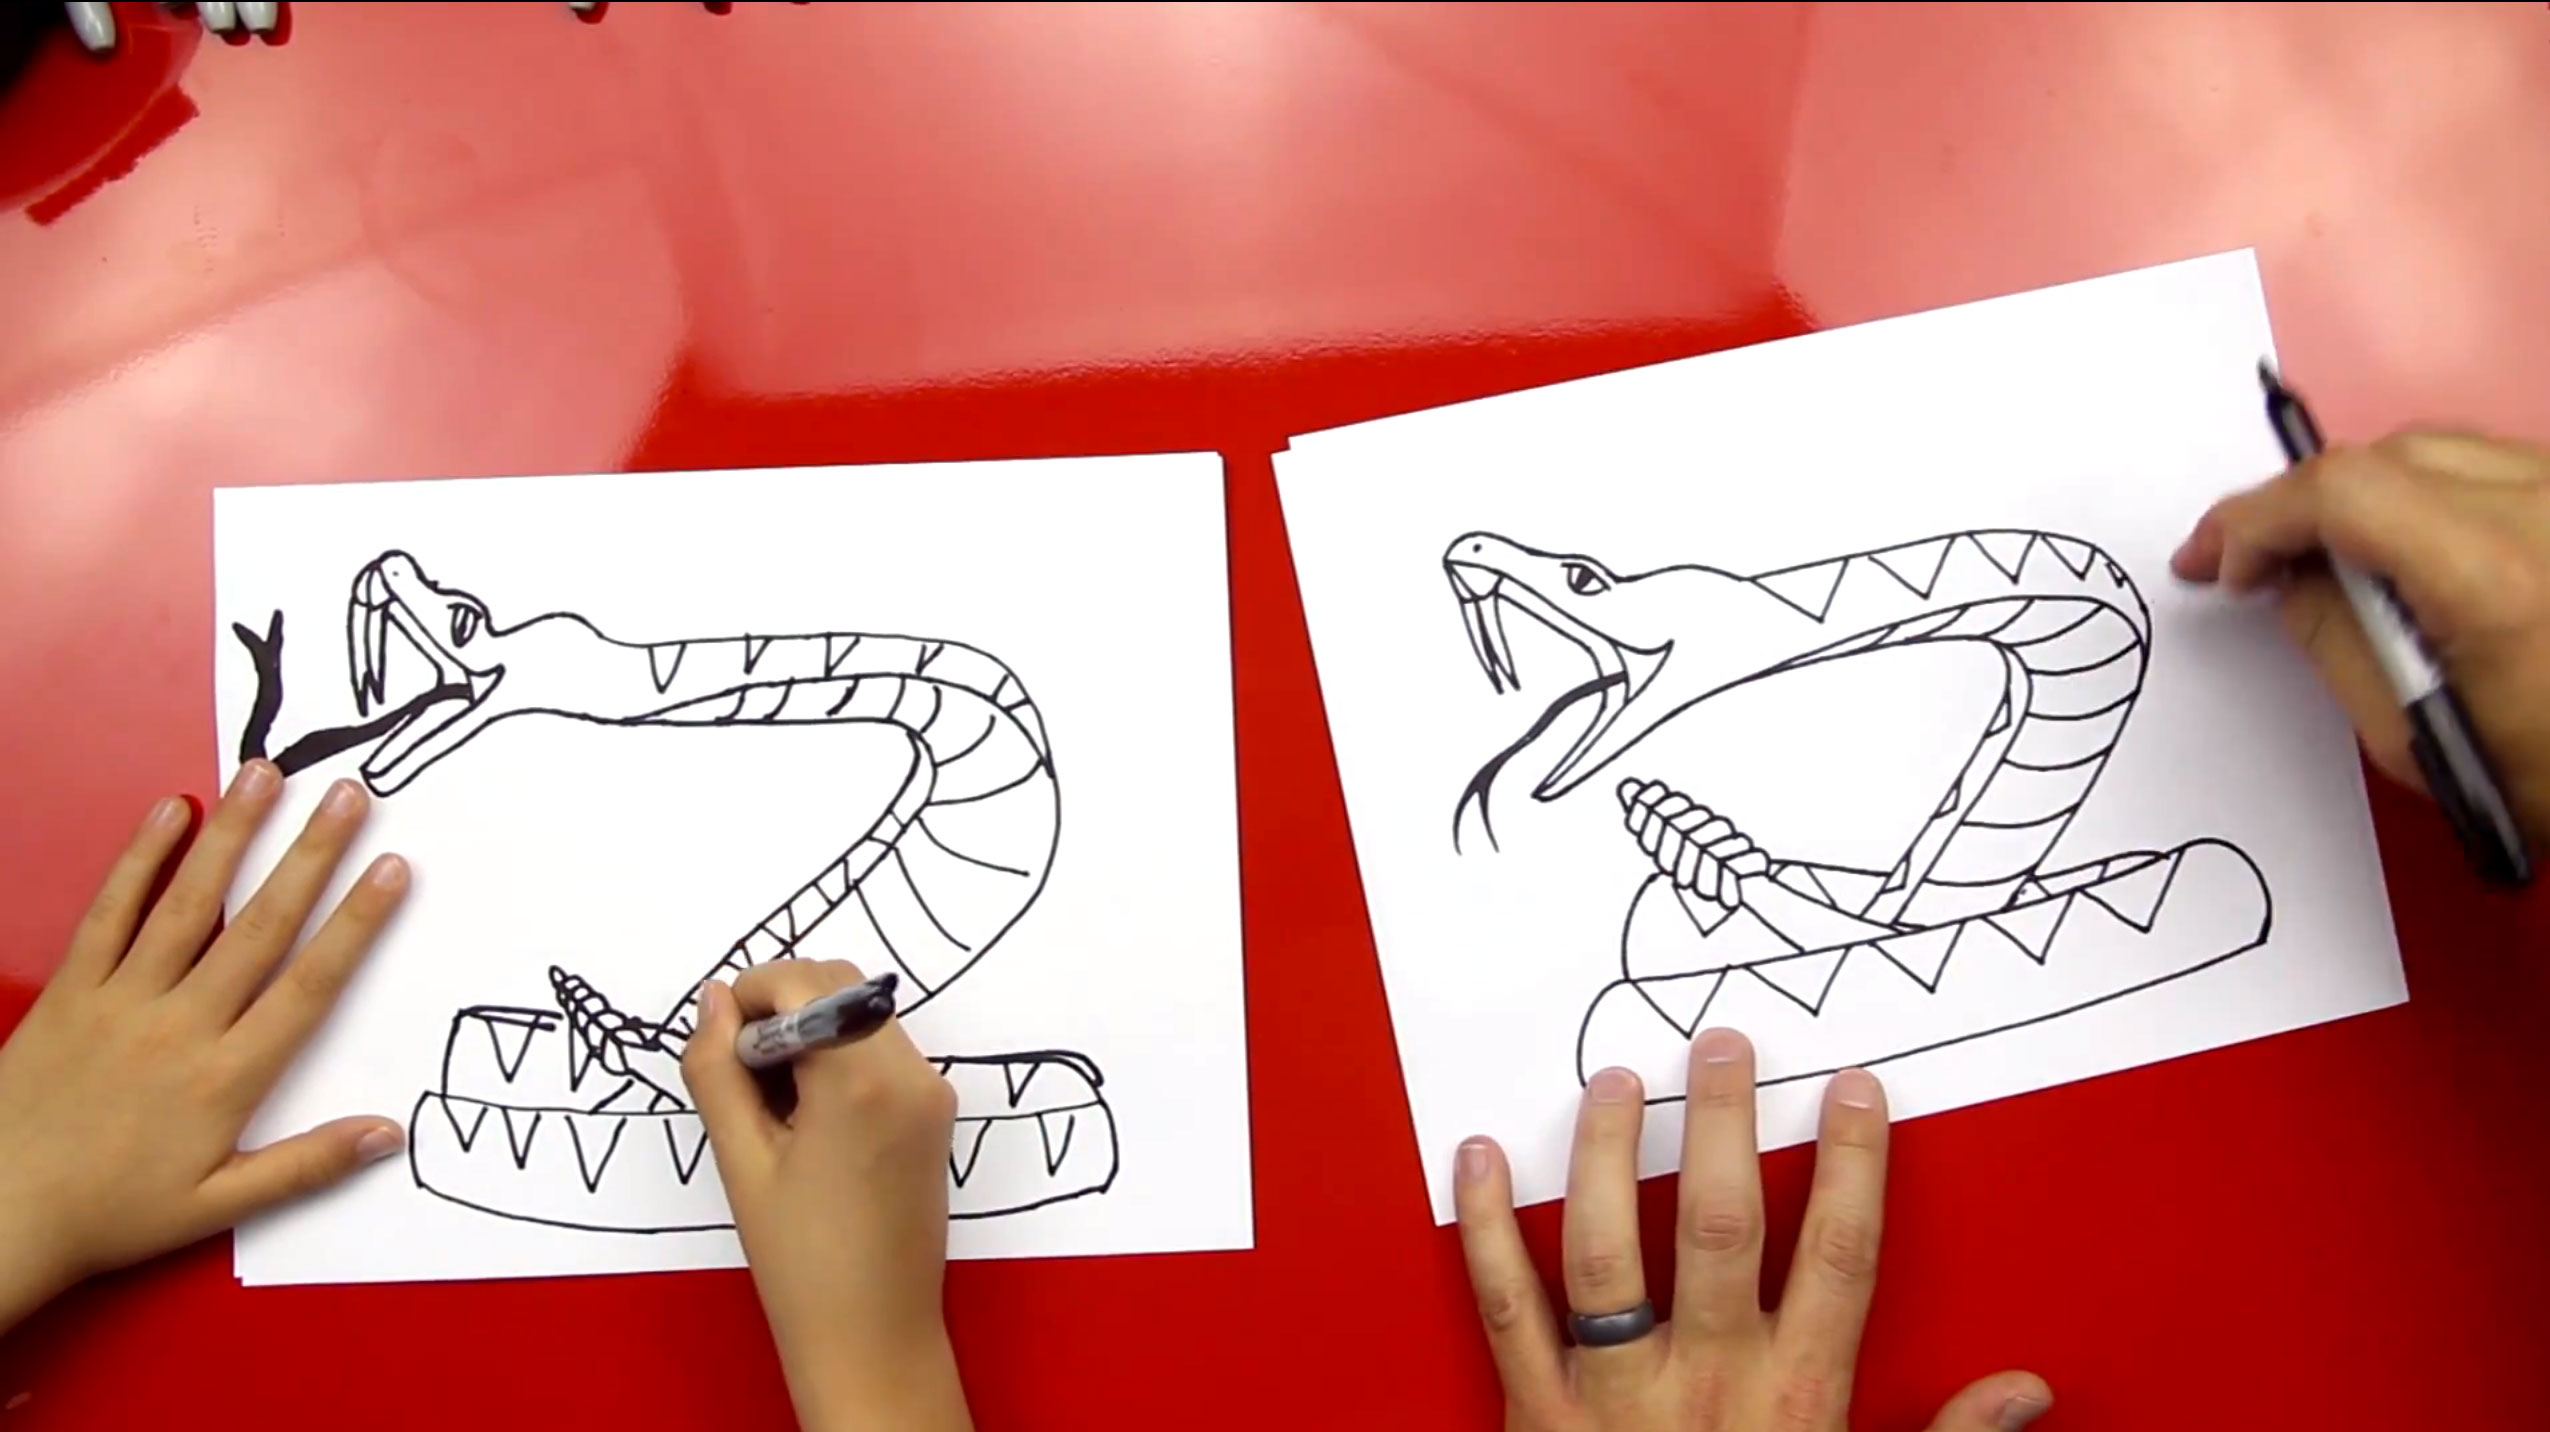 How To Draw A Rattlesnake - Art For Kids Hub